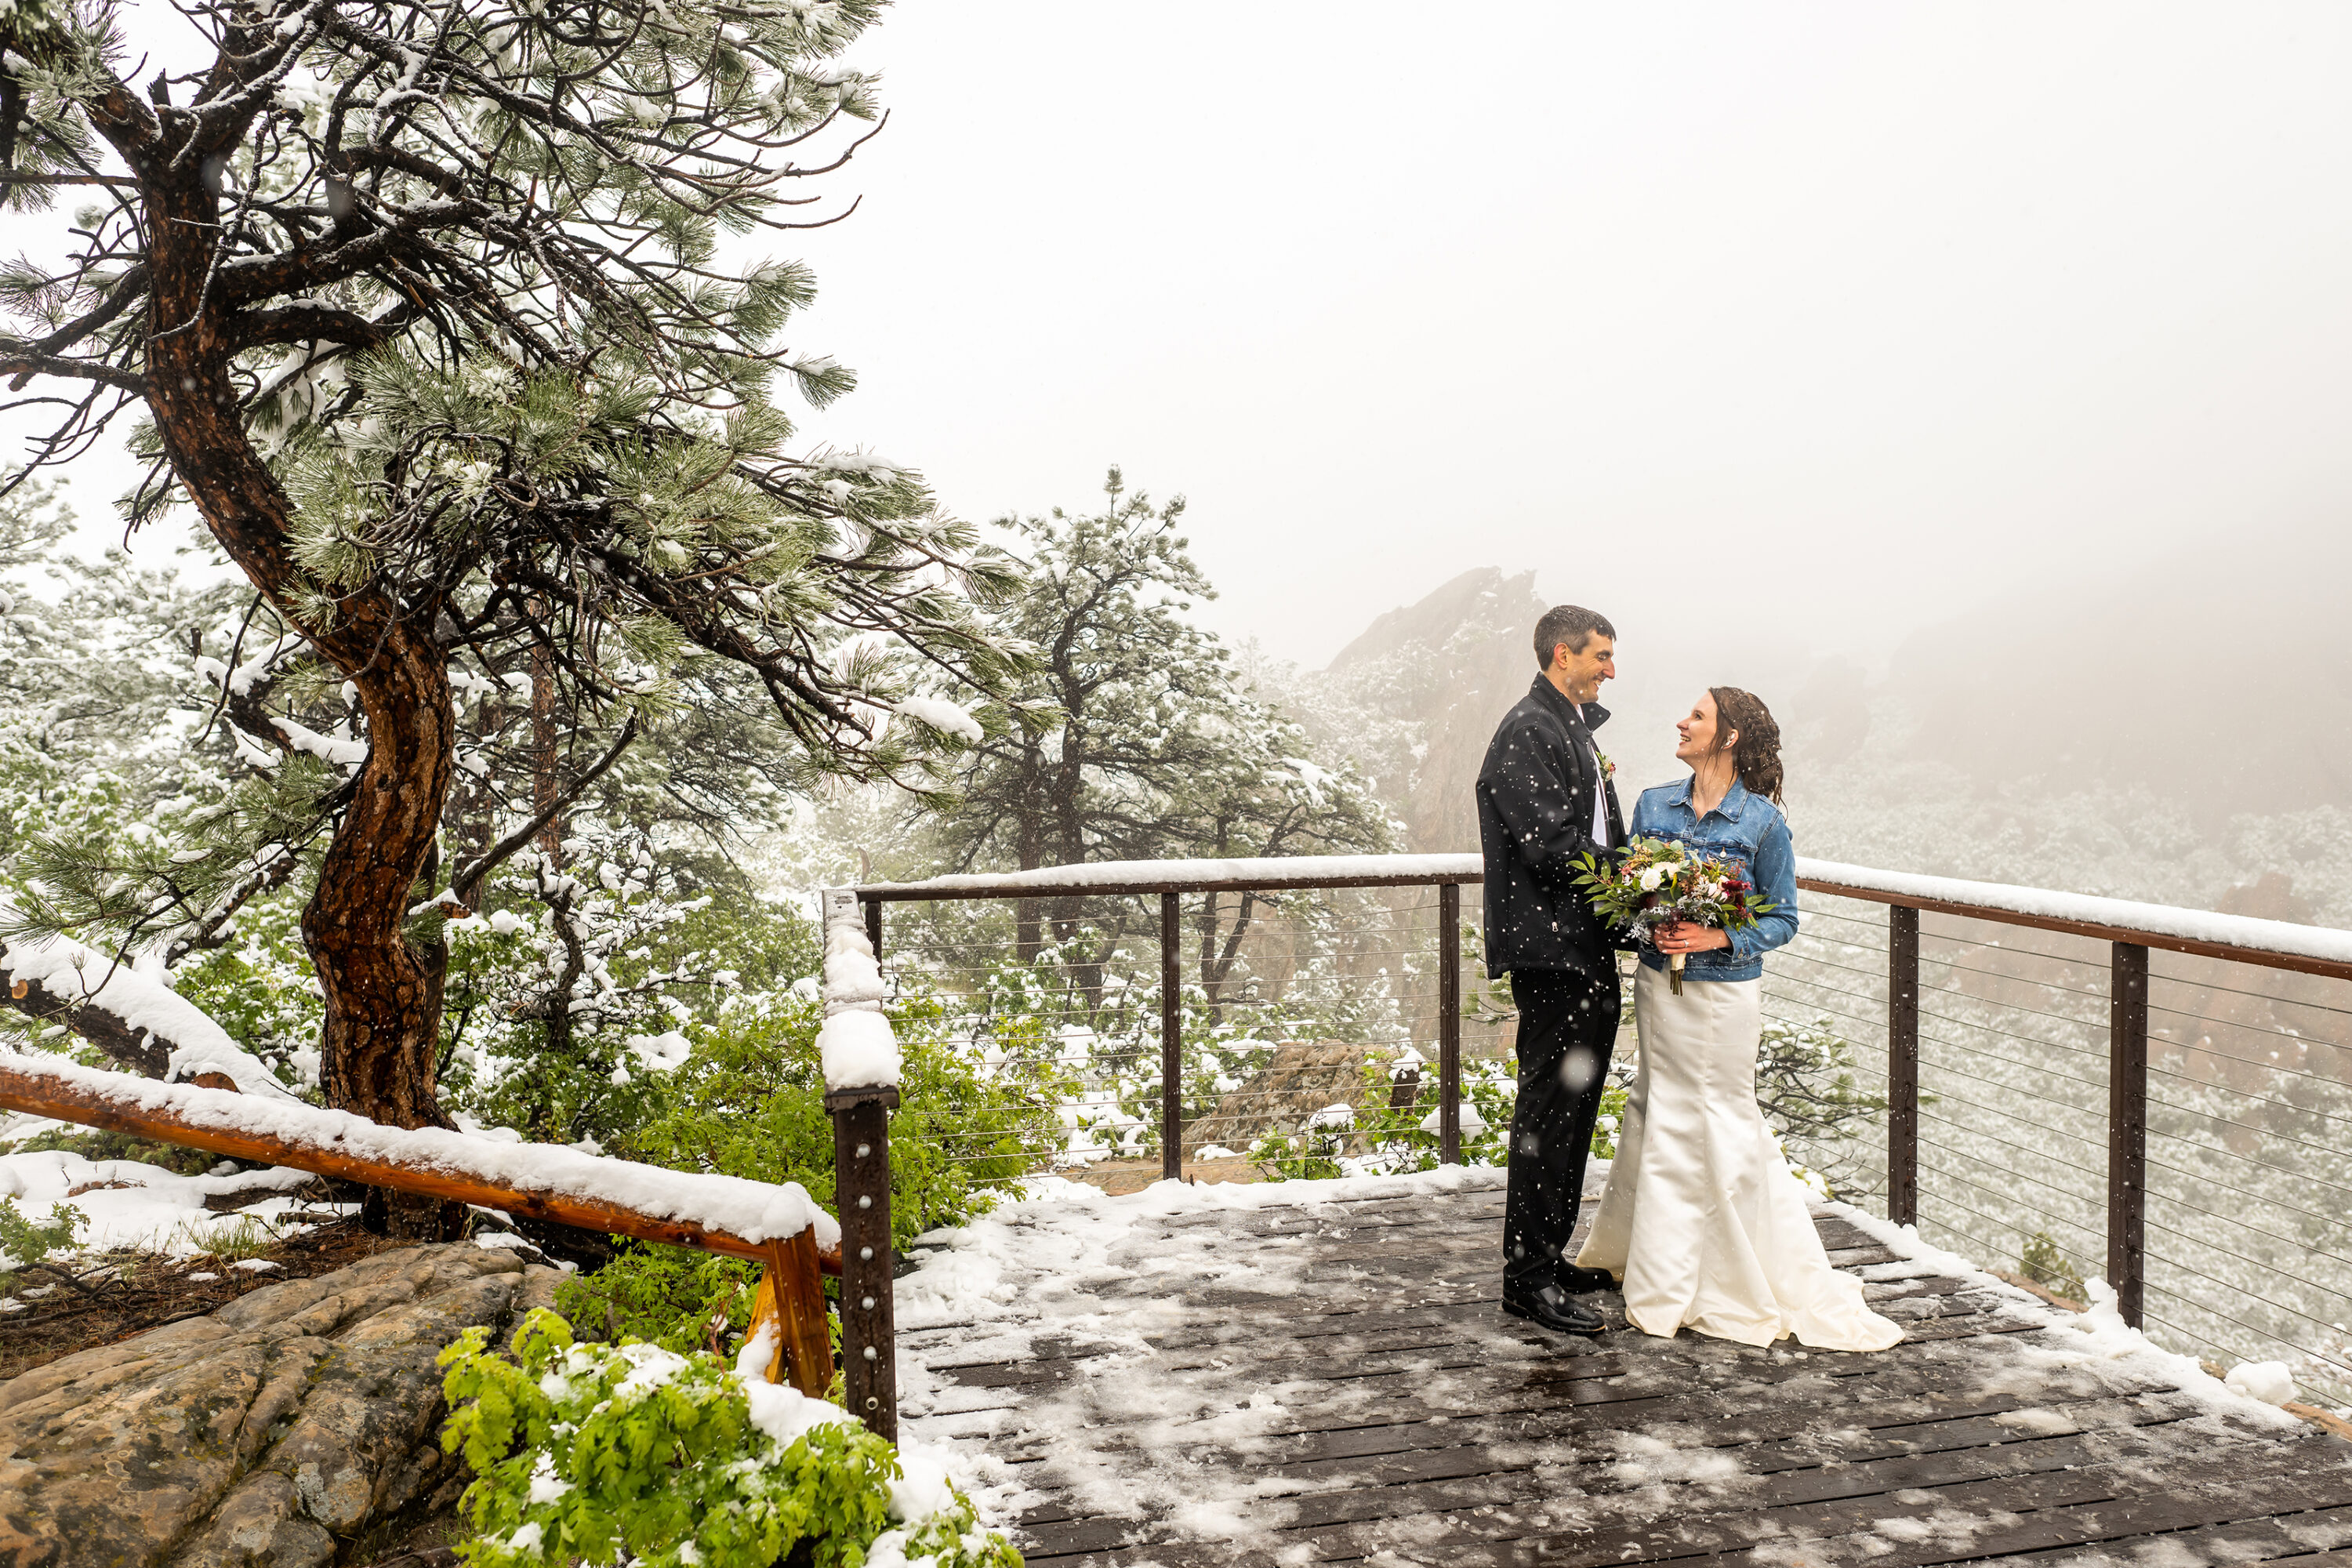 Roxborough State Park wedding at Lyons Overlook in the snow with Liz and Andrew.